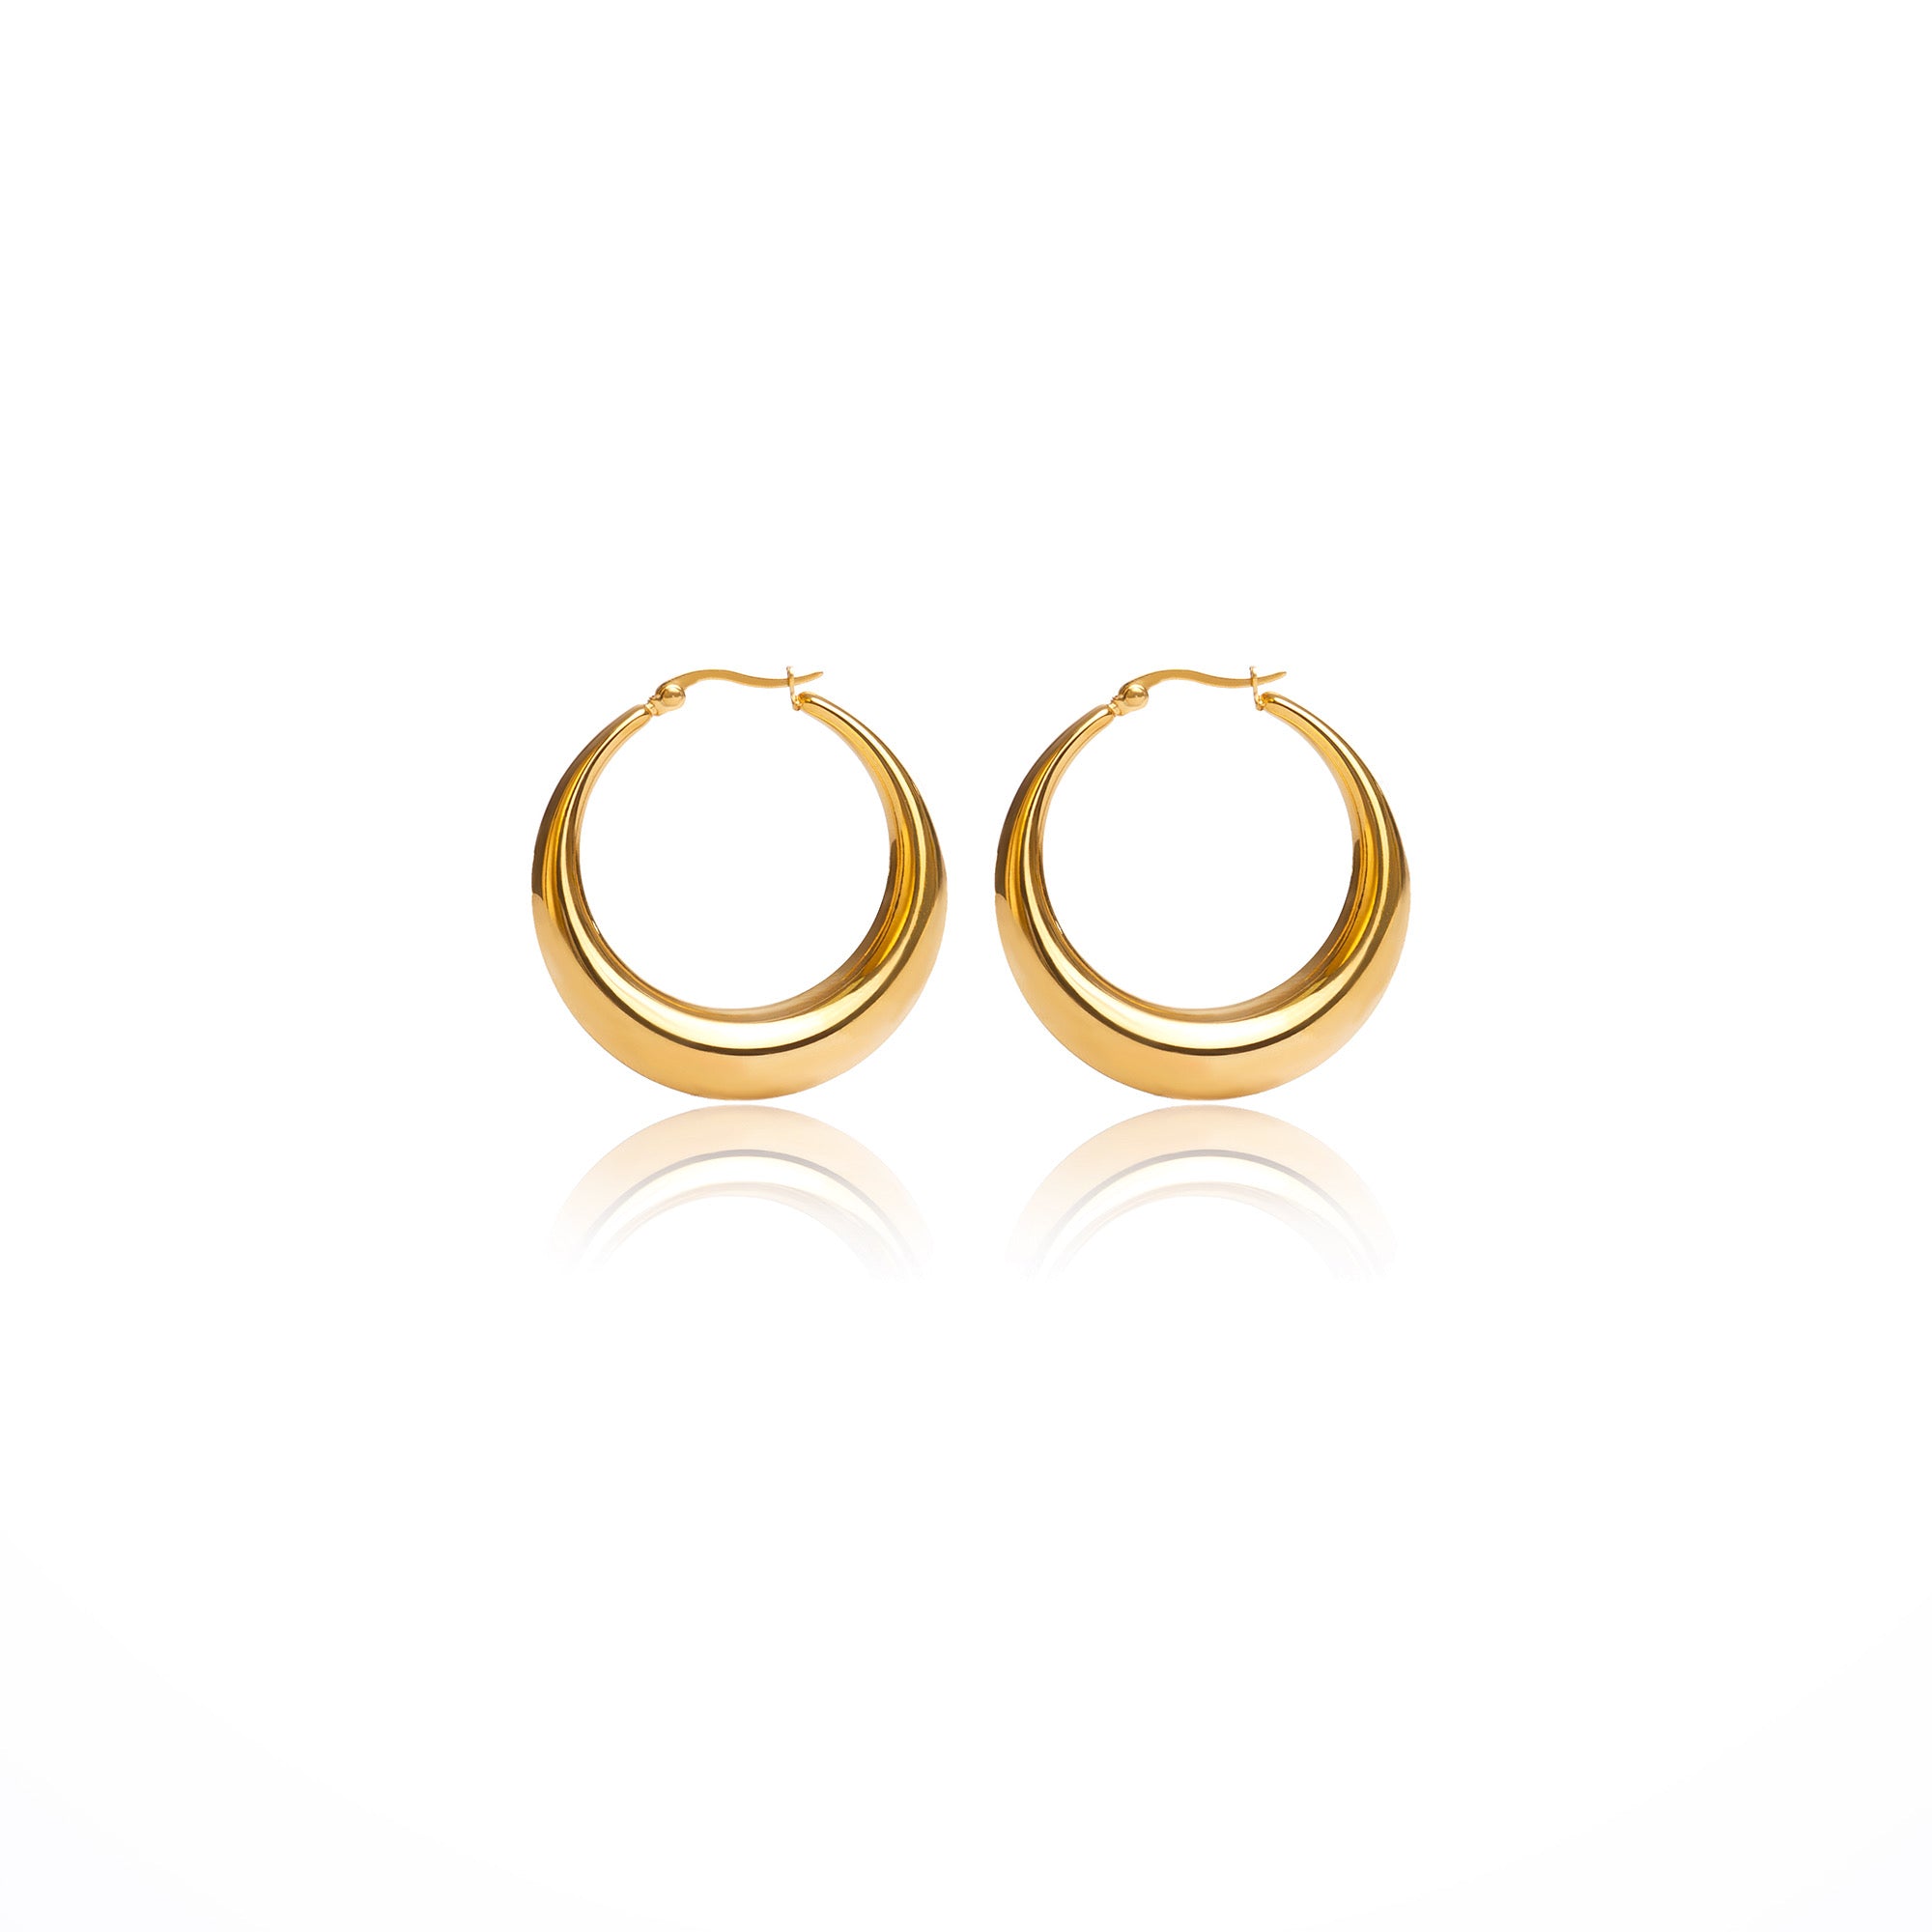 These are the sand hoop earrings you've been looking for! Big, chunky and bold - this pair of hoop earrings are perfect for every day wear. Also you can pair it with our Berri hoop earrings to create that bold look.  18k gold plated on stainless steel. Height 4CM This product is hypoallergenic and tarnish resistant.